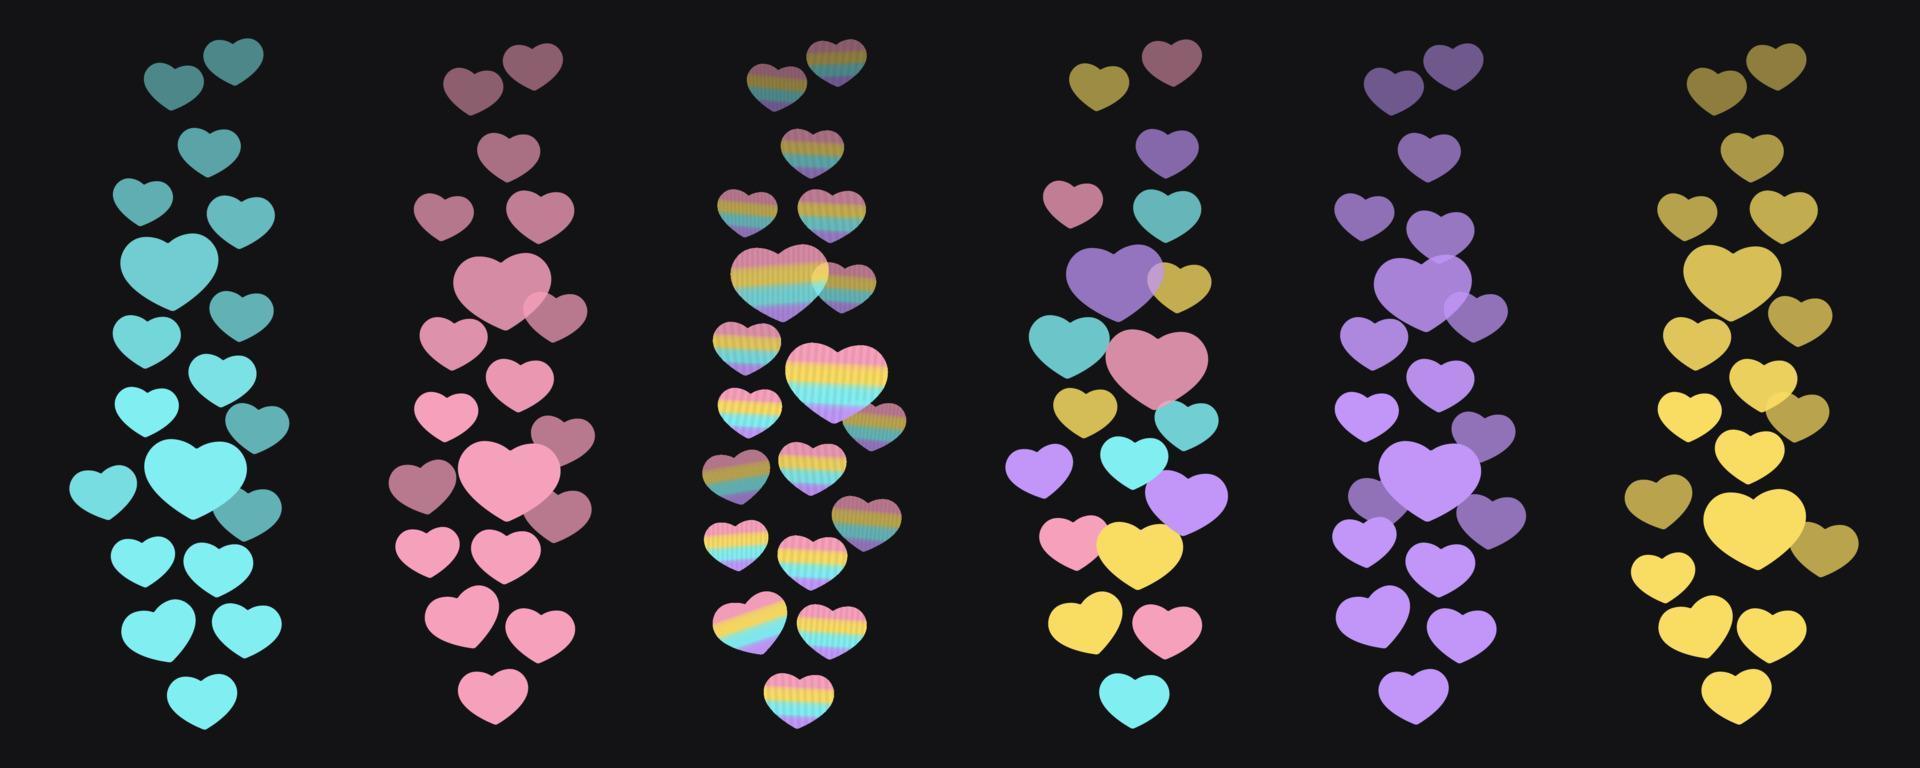 A set of likes in the live stream is a flying up icon heart. Multicolored hearts in fashionable pastel colors. The likes user counter for online videos. Vector illustration for social media bloggers.